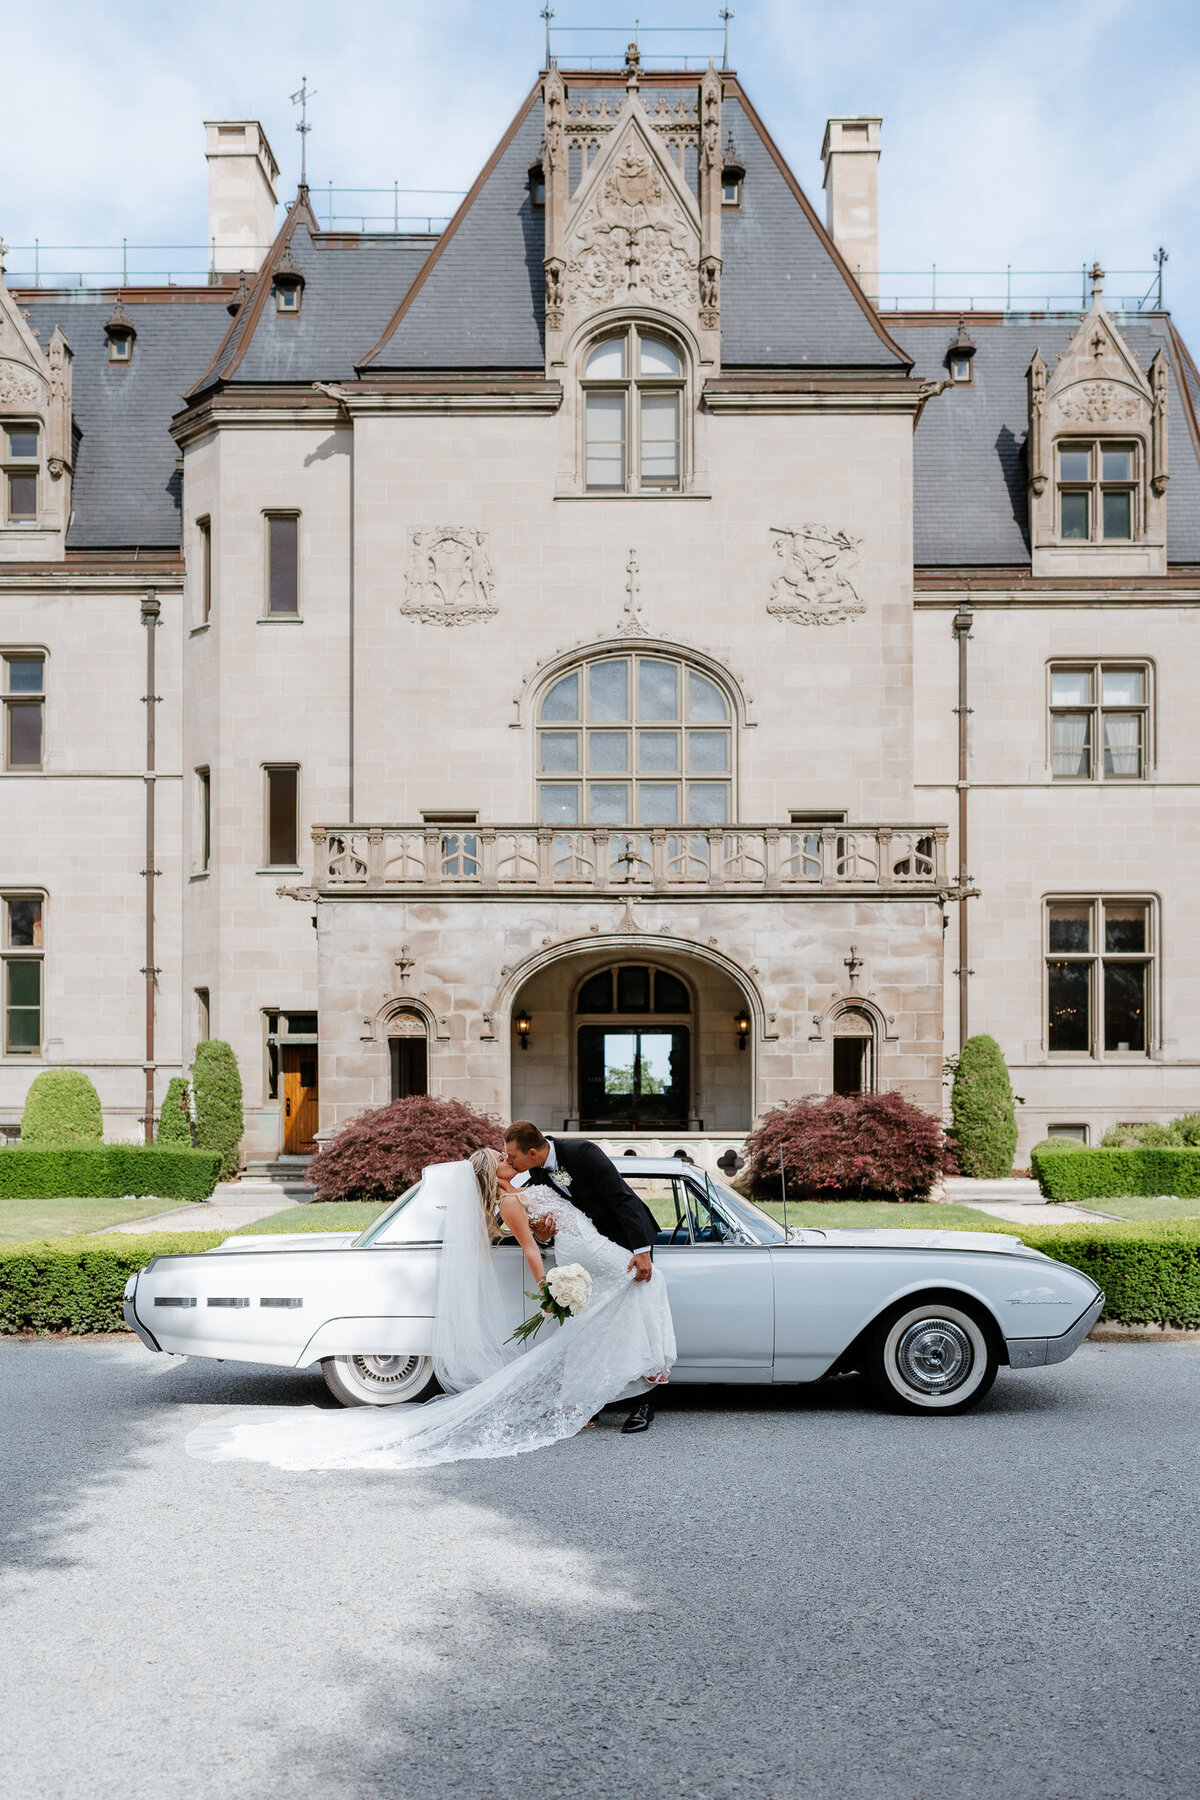 bride and groom doing a dip kiss with a white vintage car in the background